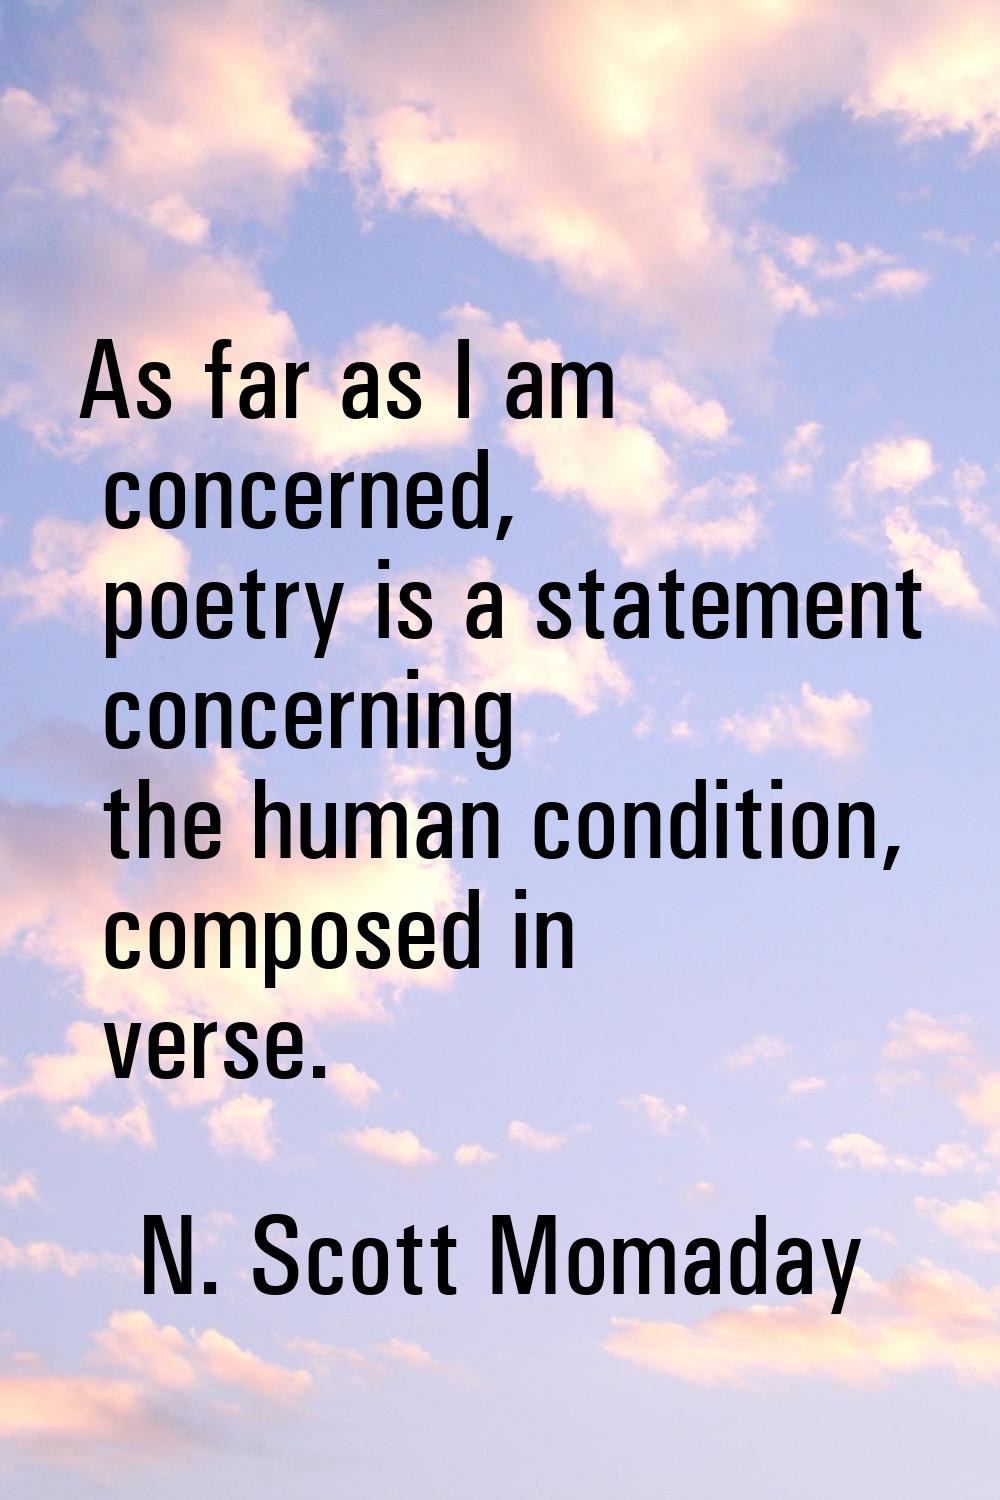 As far as I am concerned, poetry is a statement concerning the human condition, composed in verse.